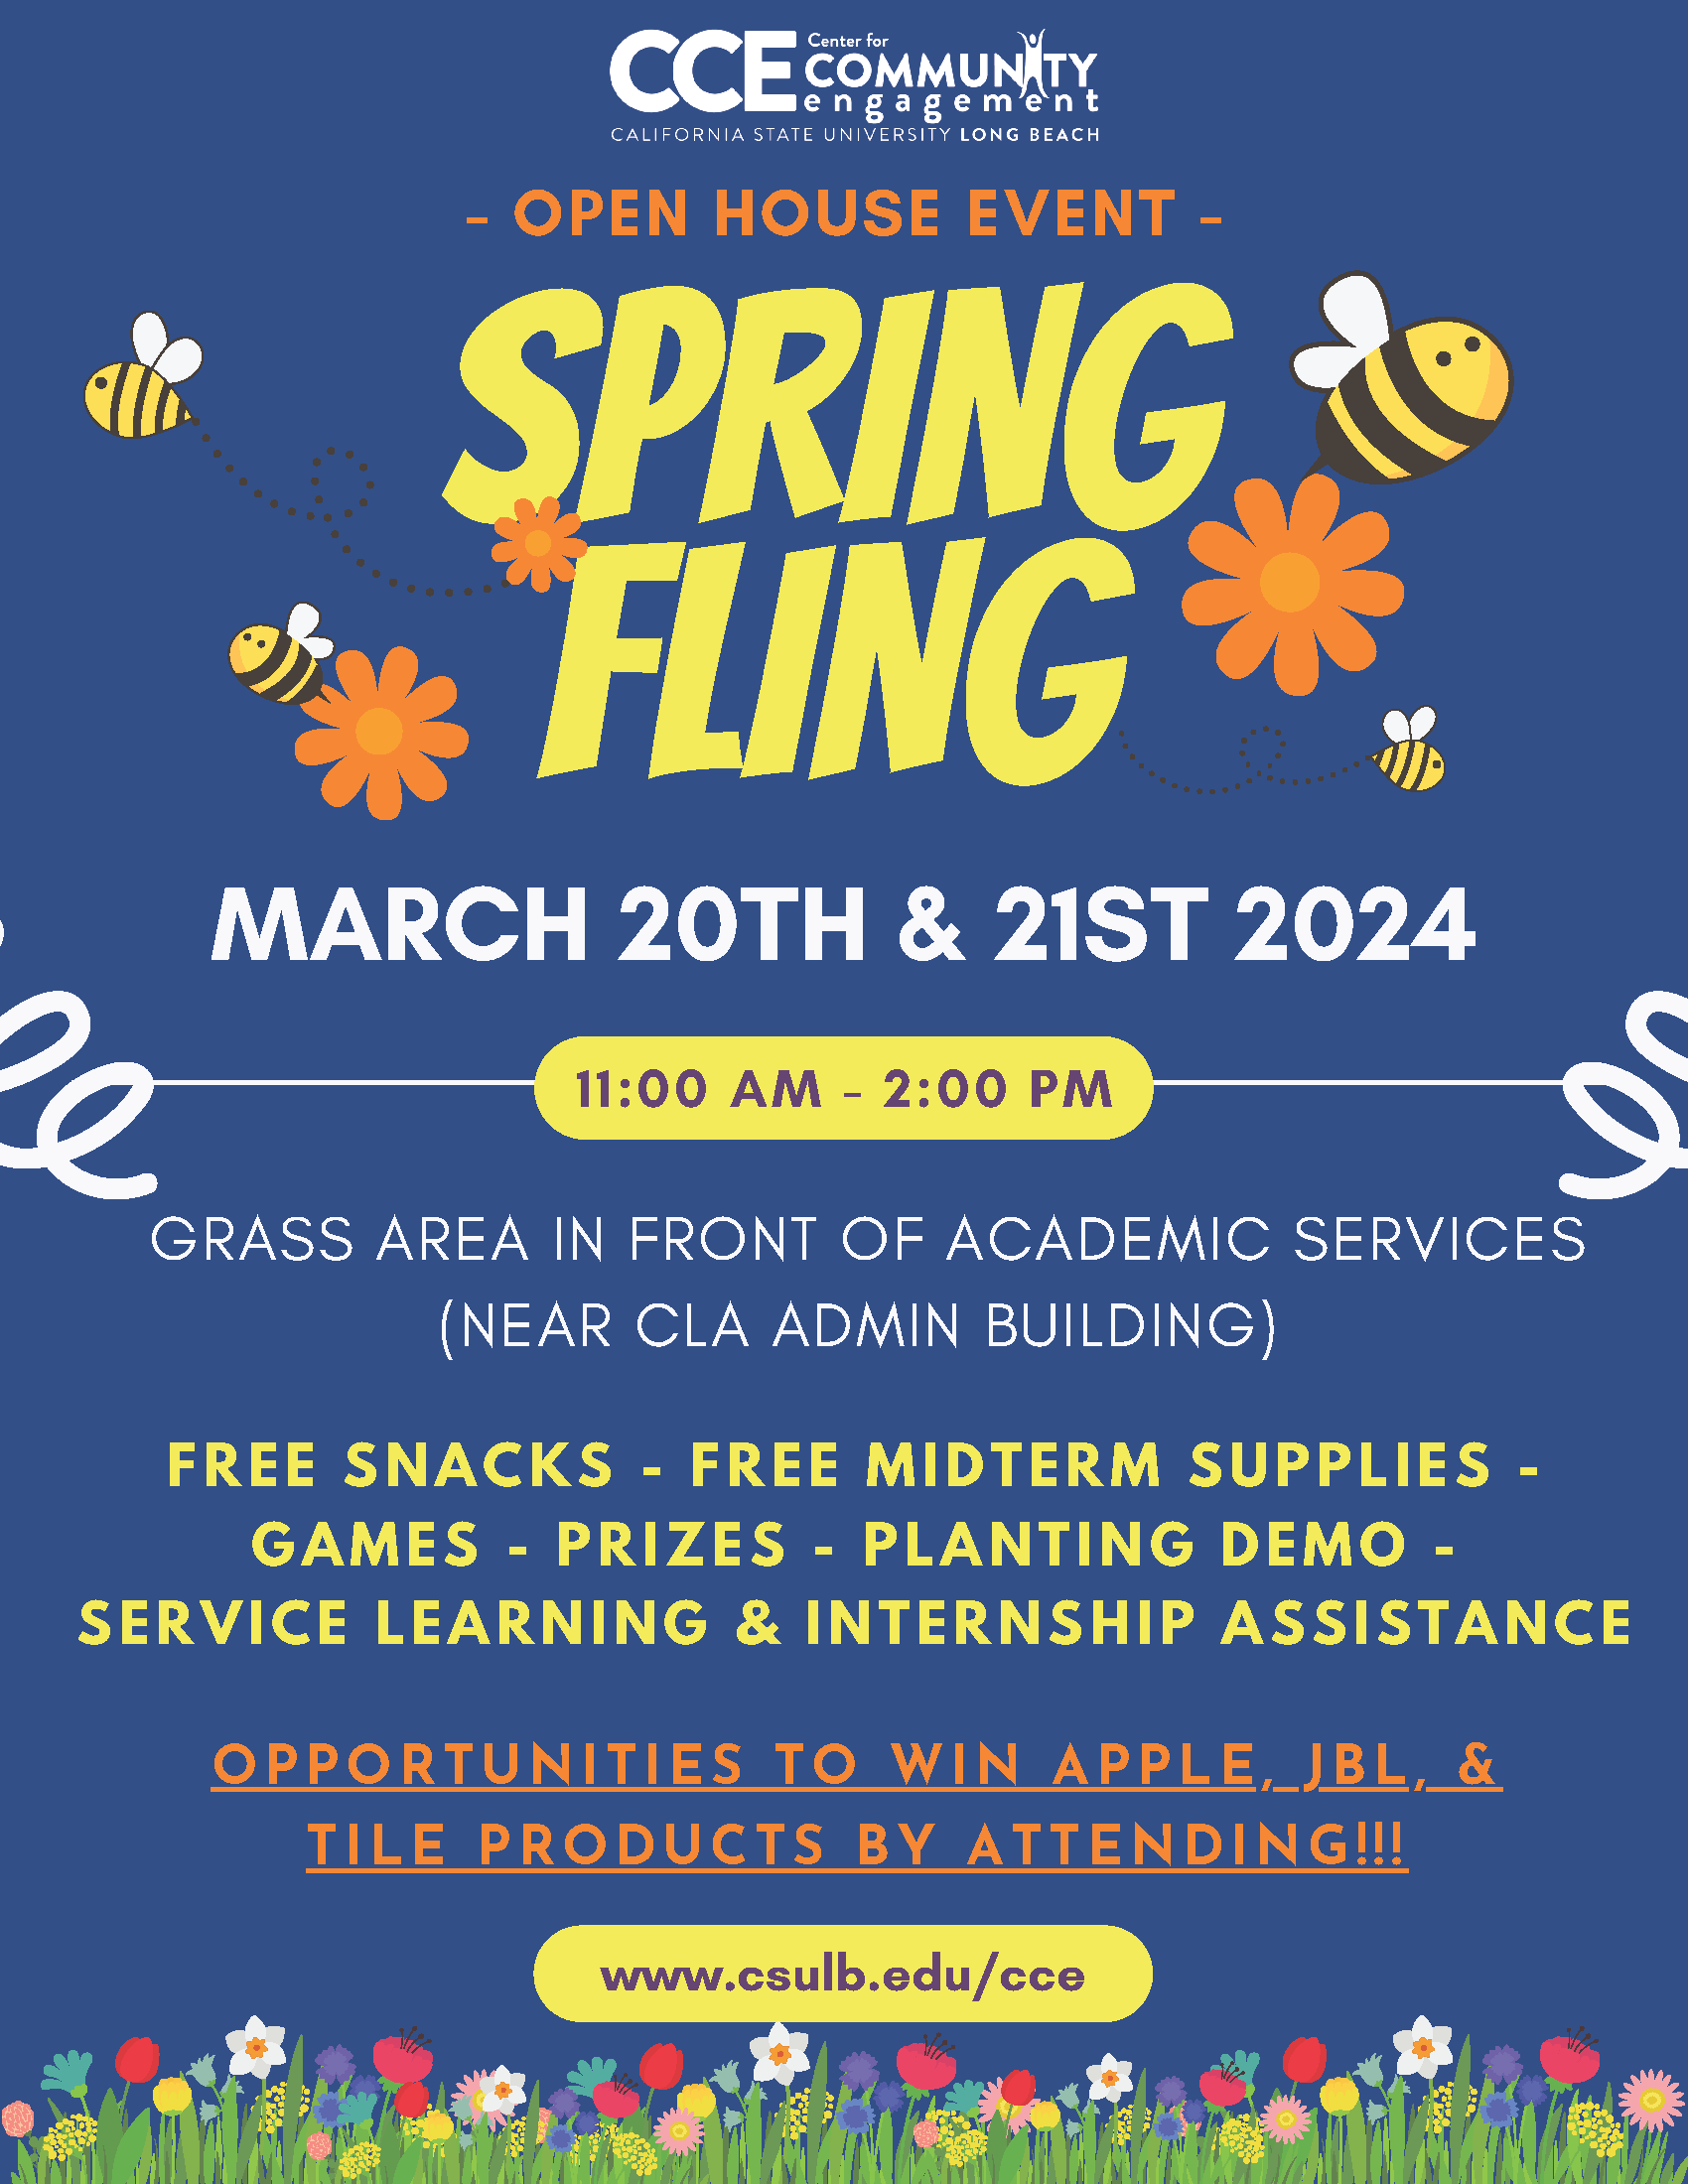 Event flyer for spring fling: open house. Place: Lower quad in between CLA and AS buildings. March 20-21 from 11-2